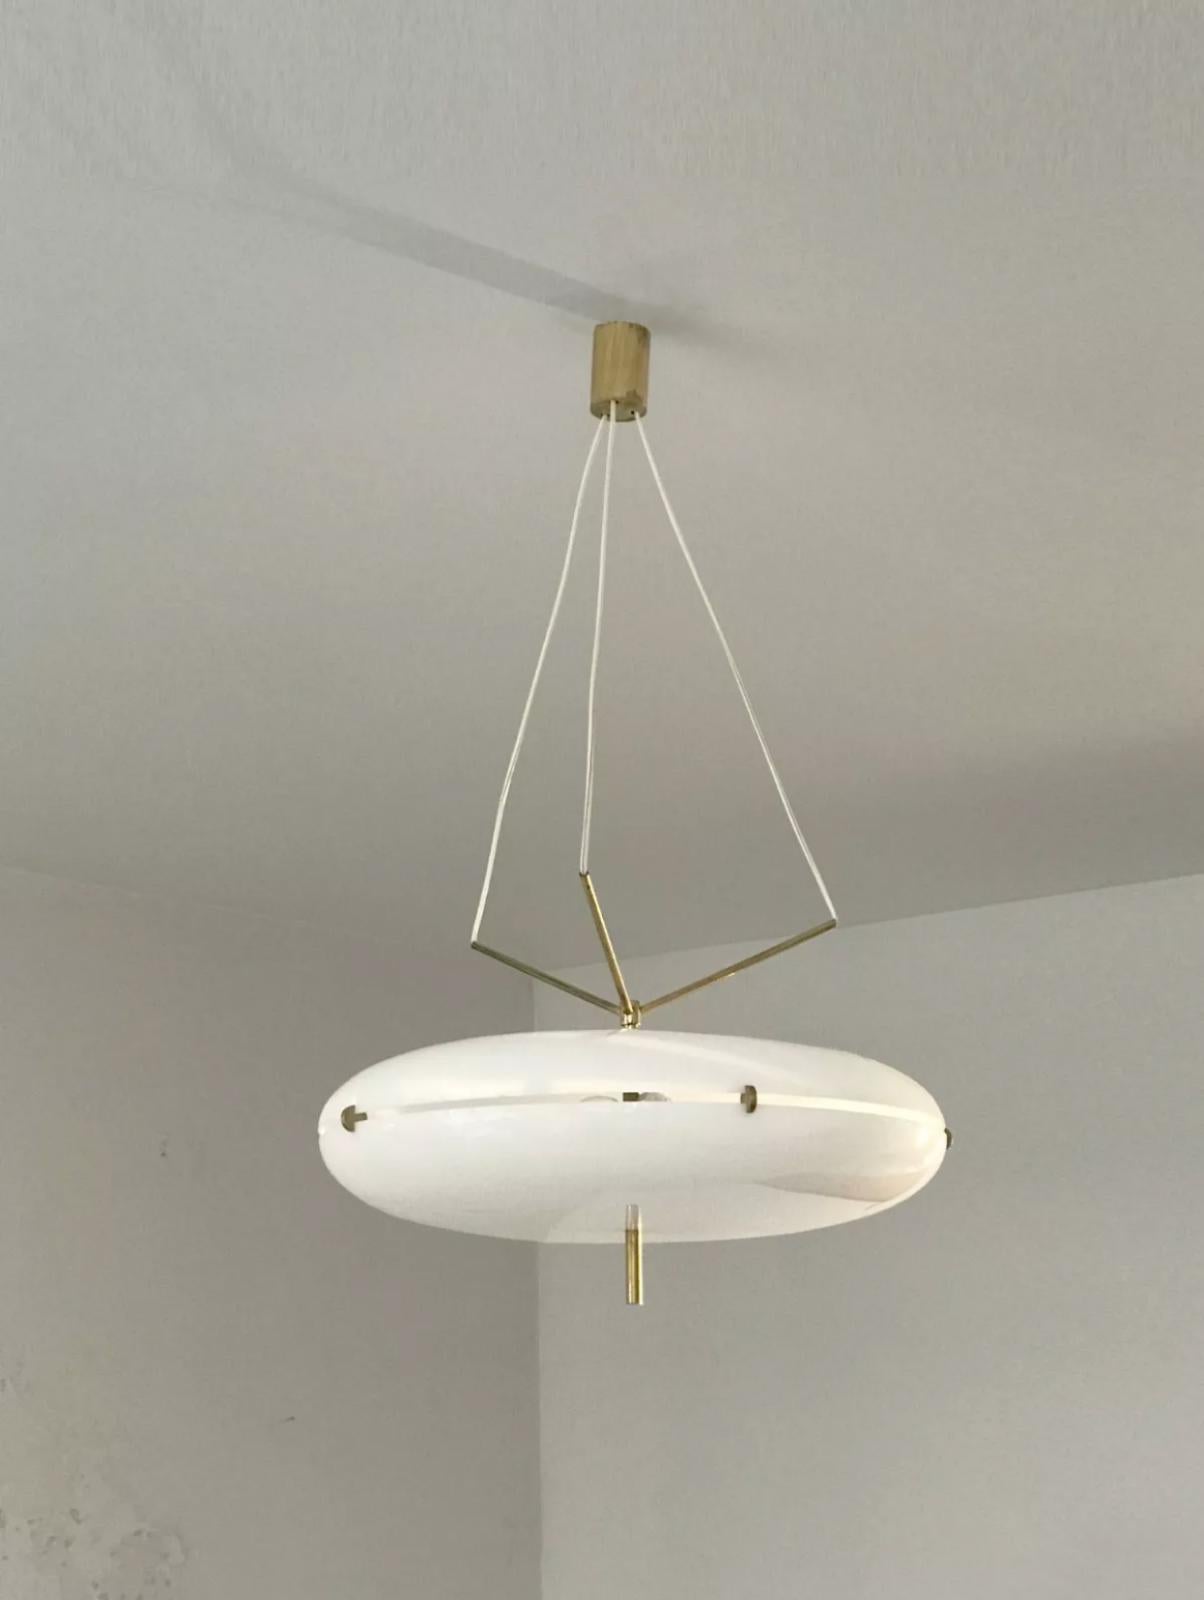 A spectacular aerial suspension or chandelier, Modernist, Space-Age, Forme-Libre, UFO-inspired ovoid body in white diffusing Perspex, structure and finishes in bronze or gilded brass, unique 3-wire suspension system connected within a triangular